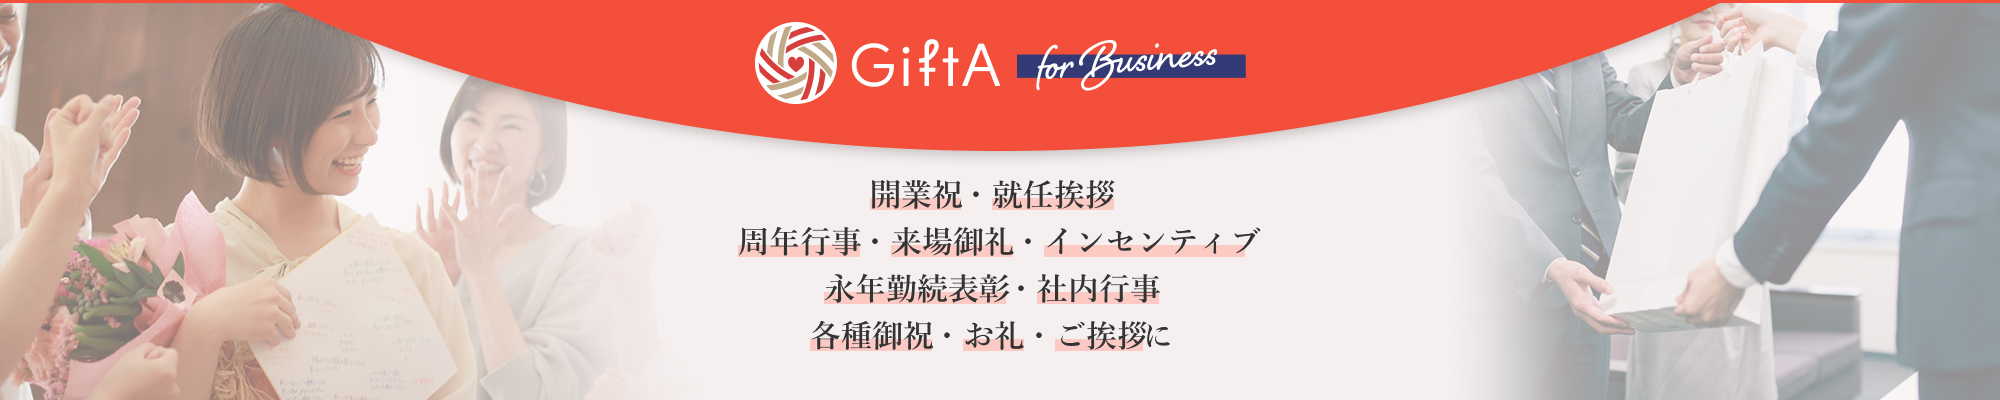 GiftA for Business